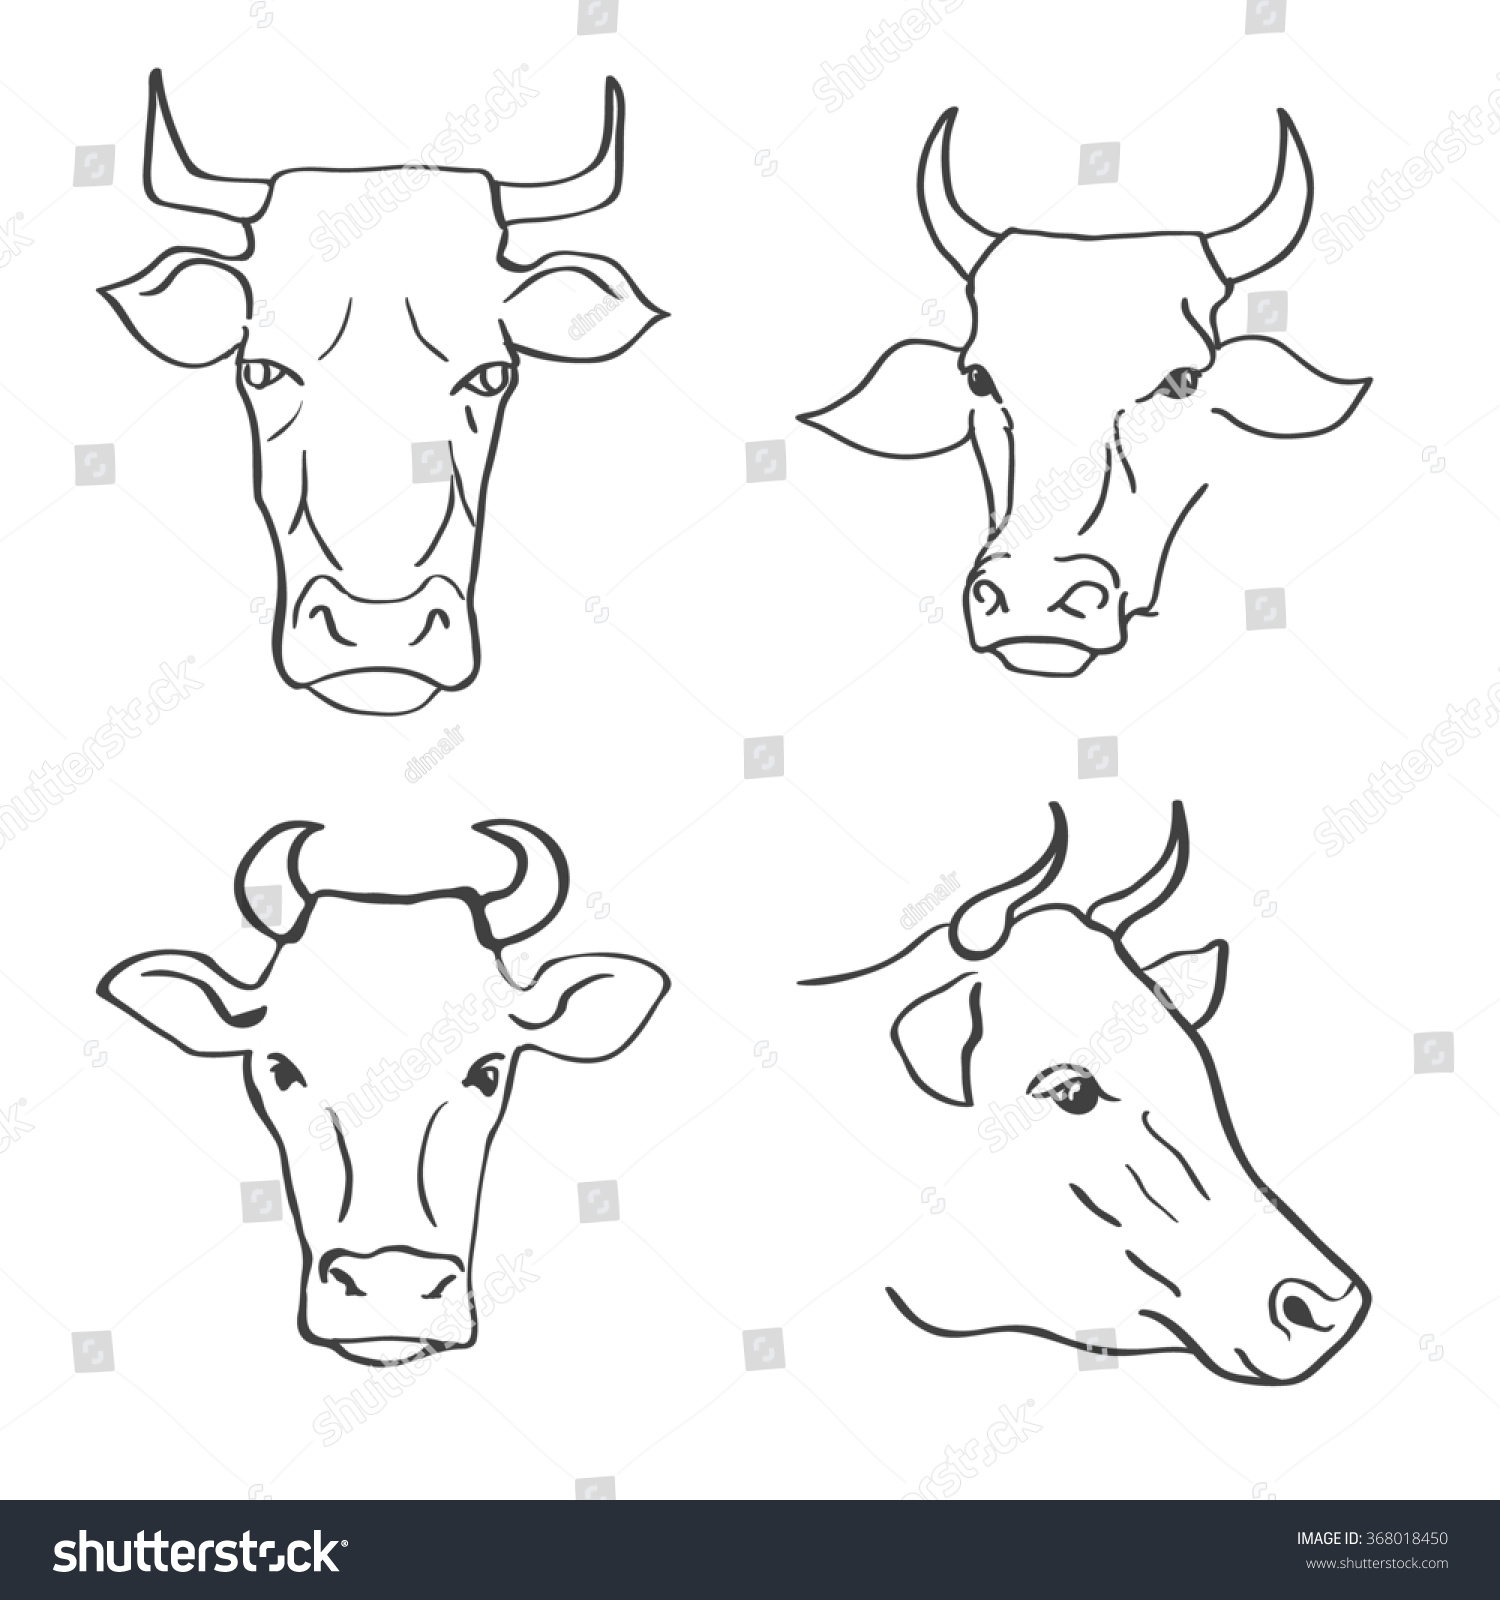 Set Of Hand Drawn Cow Heads Illustration - 368018450 : Shutterstock